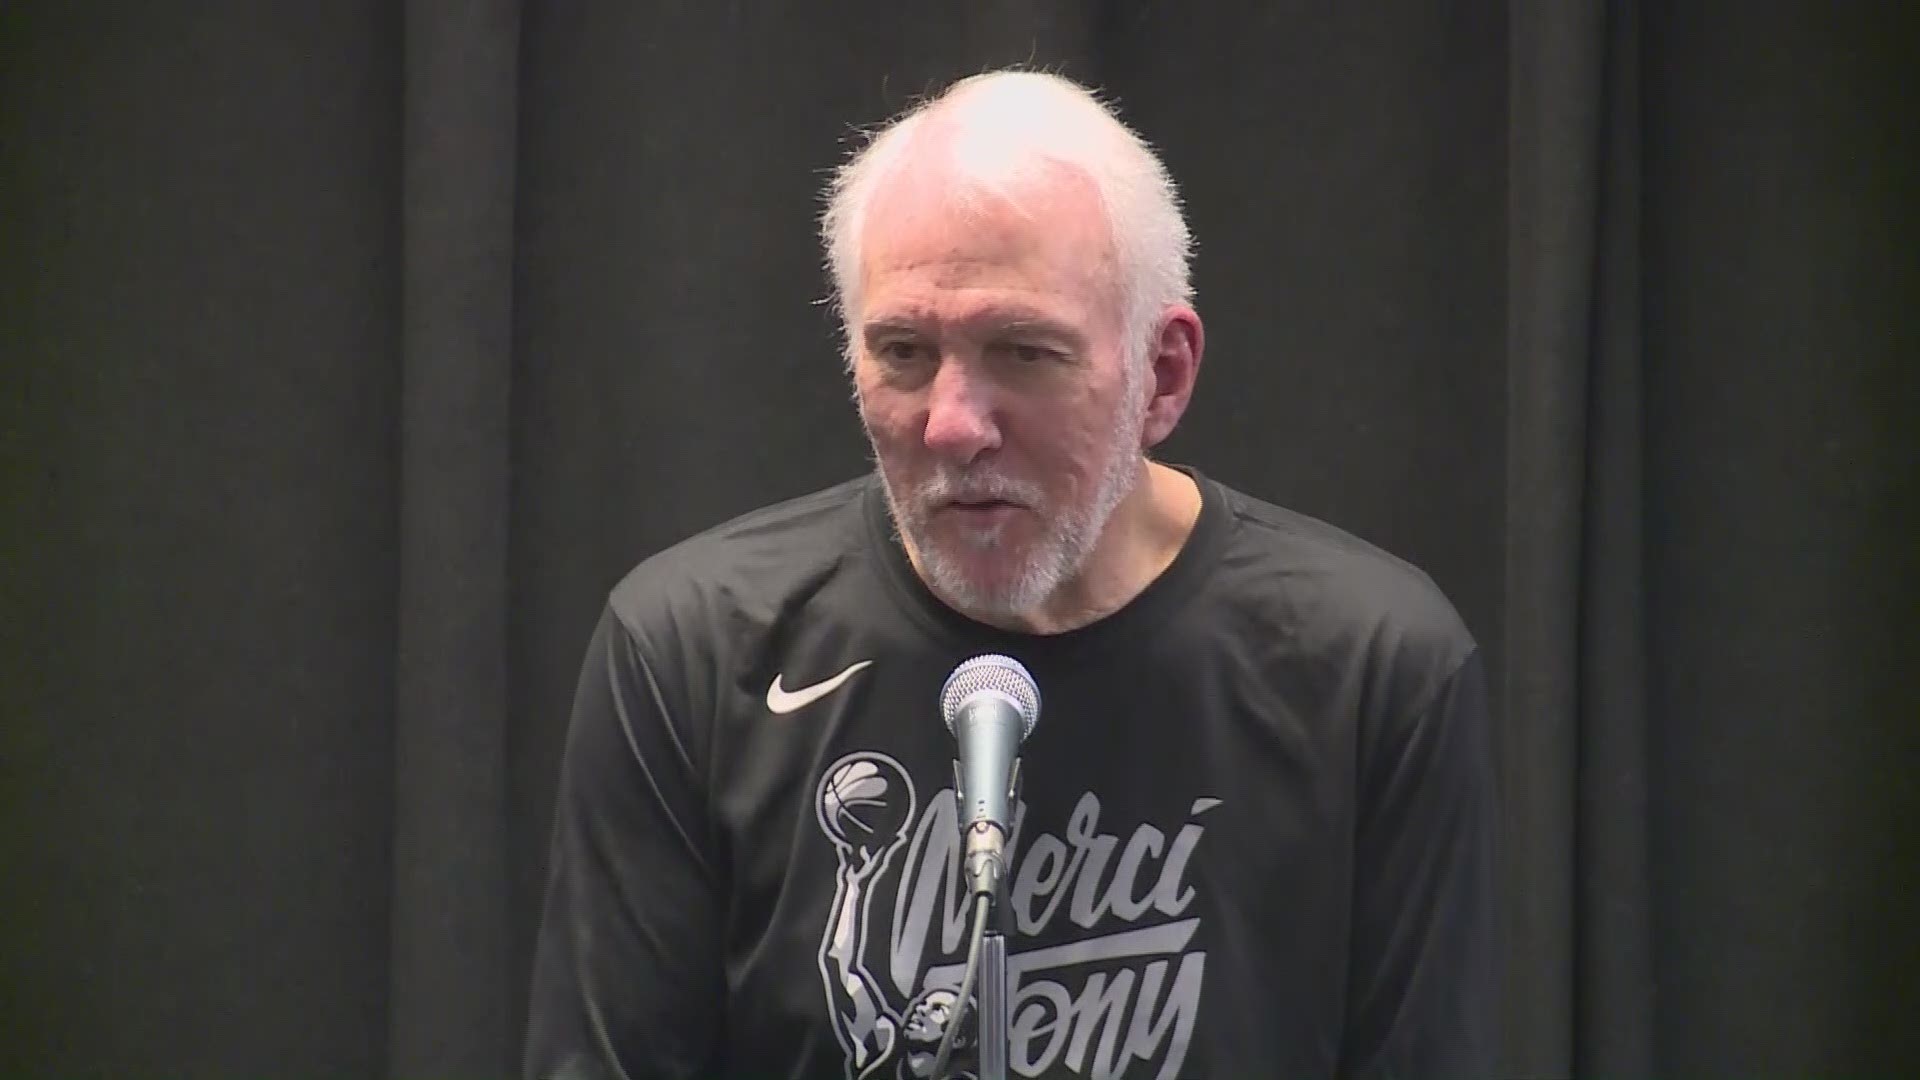 Coach Pop will say "Merci Tony" along with Spurs fans tonight when his jersey is retired. Listen to our full interview with Coach Pop ahead of the game.